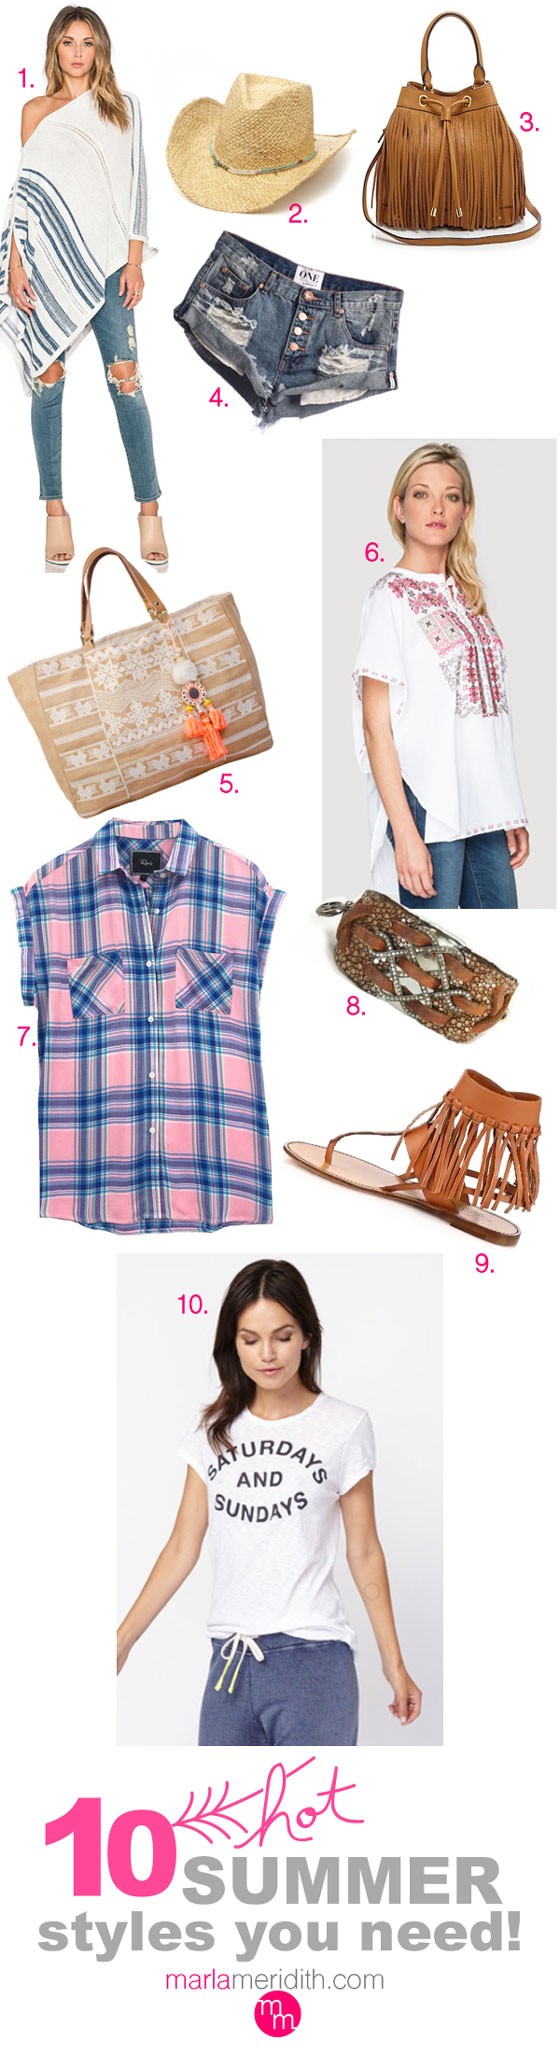 10 HOT Summer Styles You Need #MMStyle | MarlaMeridith.com ( @marlameridith )